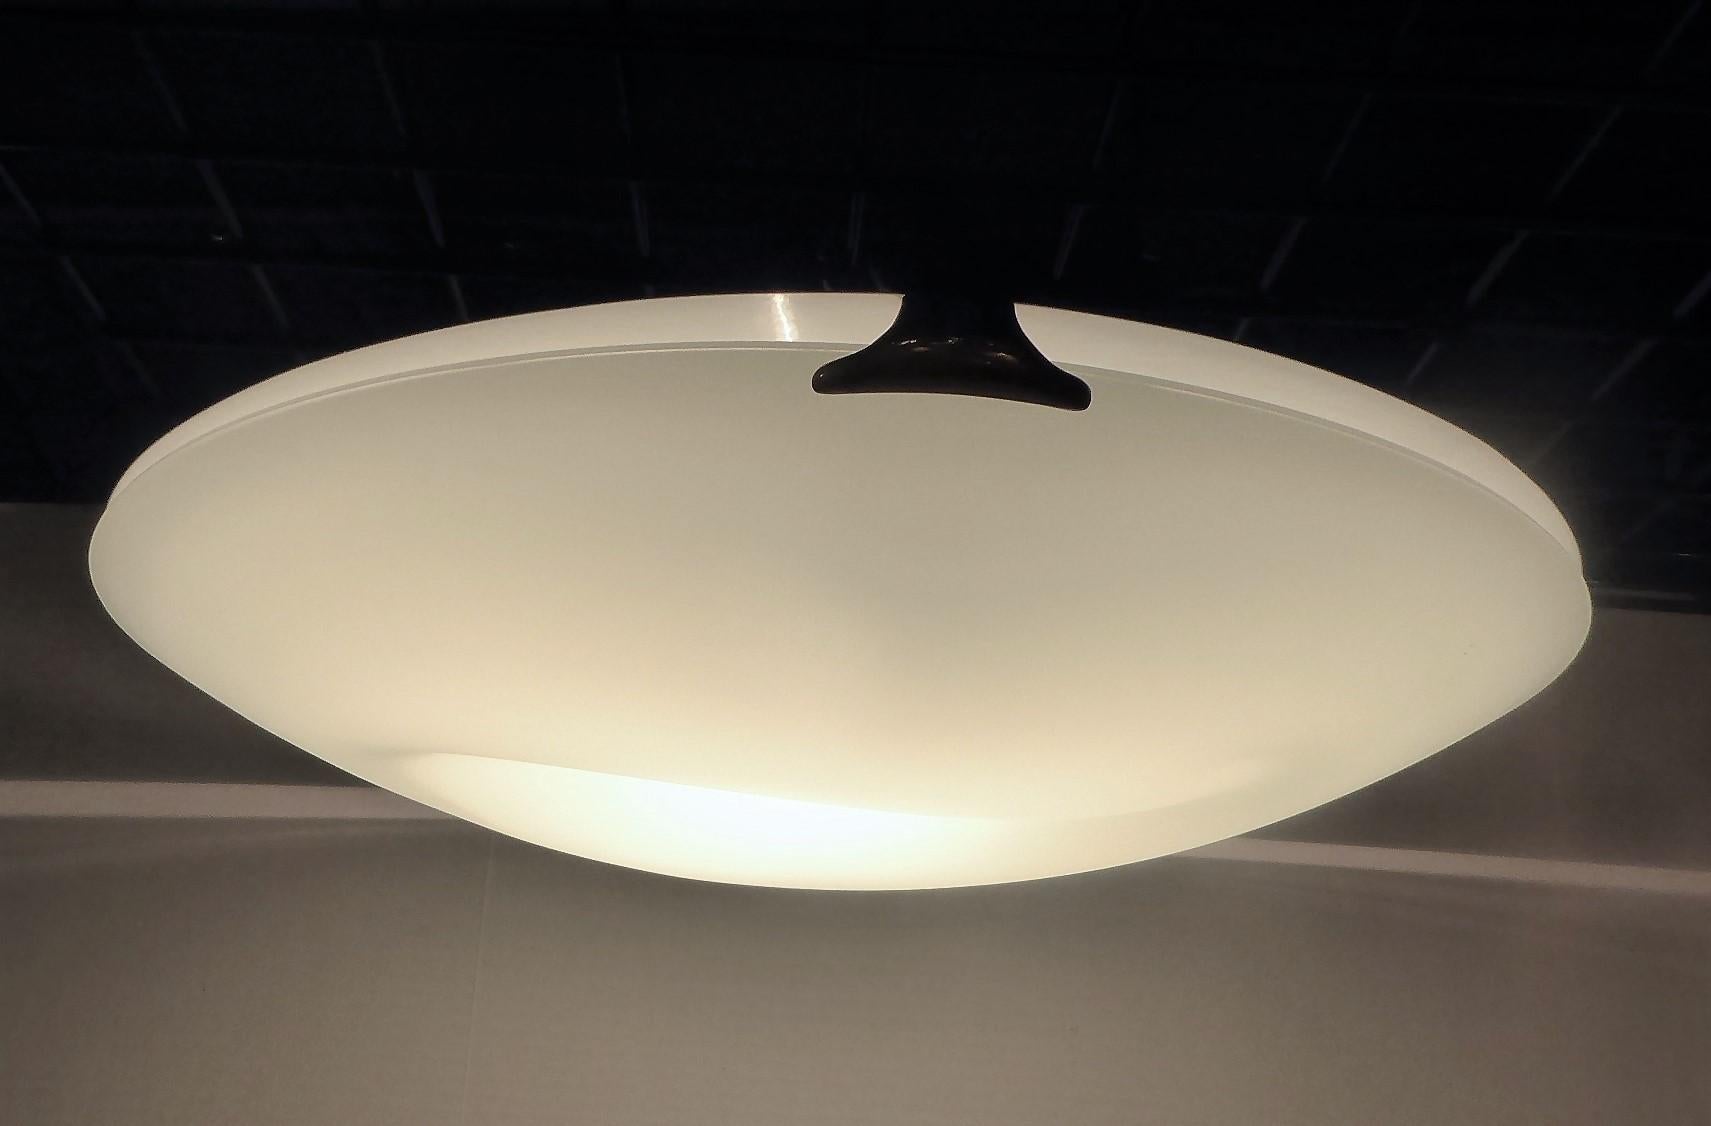 1980s frosted blown glass sculptural flush mount ceiling light with a Yin Yang form in the glass and brass side connectors. Halogen bulb light source.
Measurements: 20 inches diameter x 6 inches deep from ceiling.